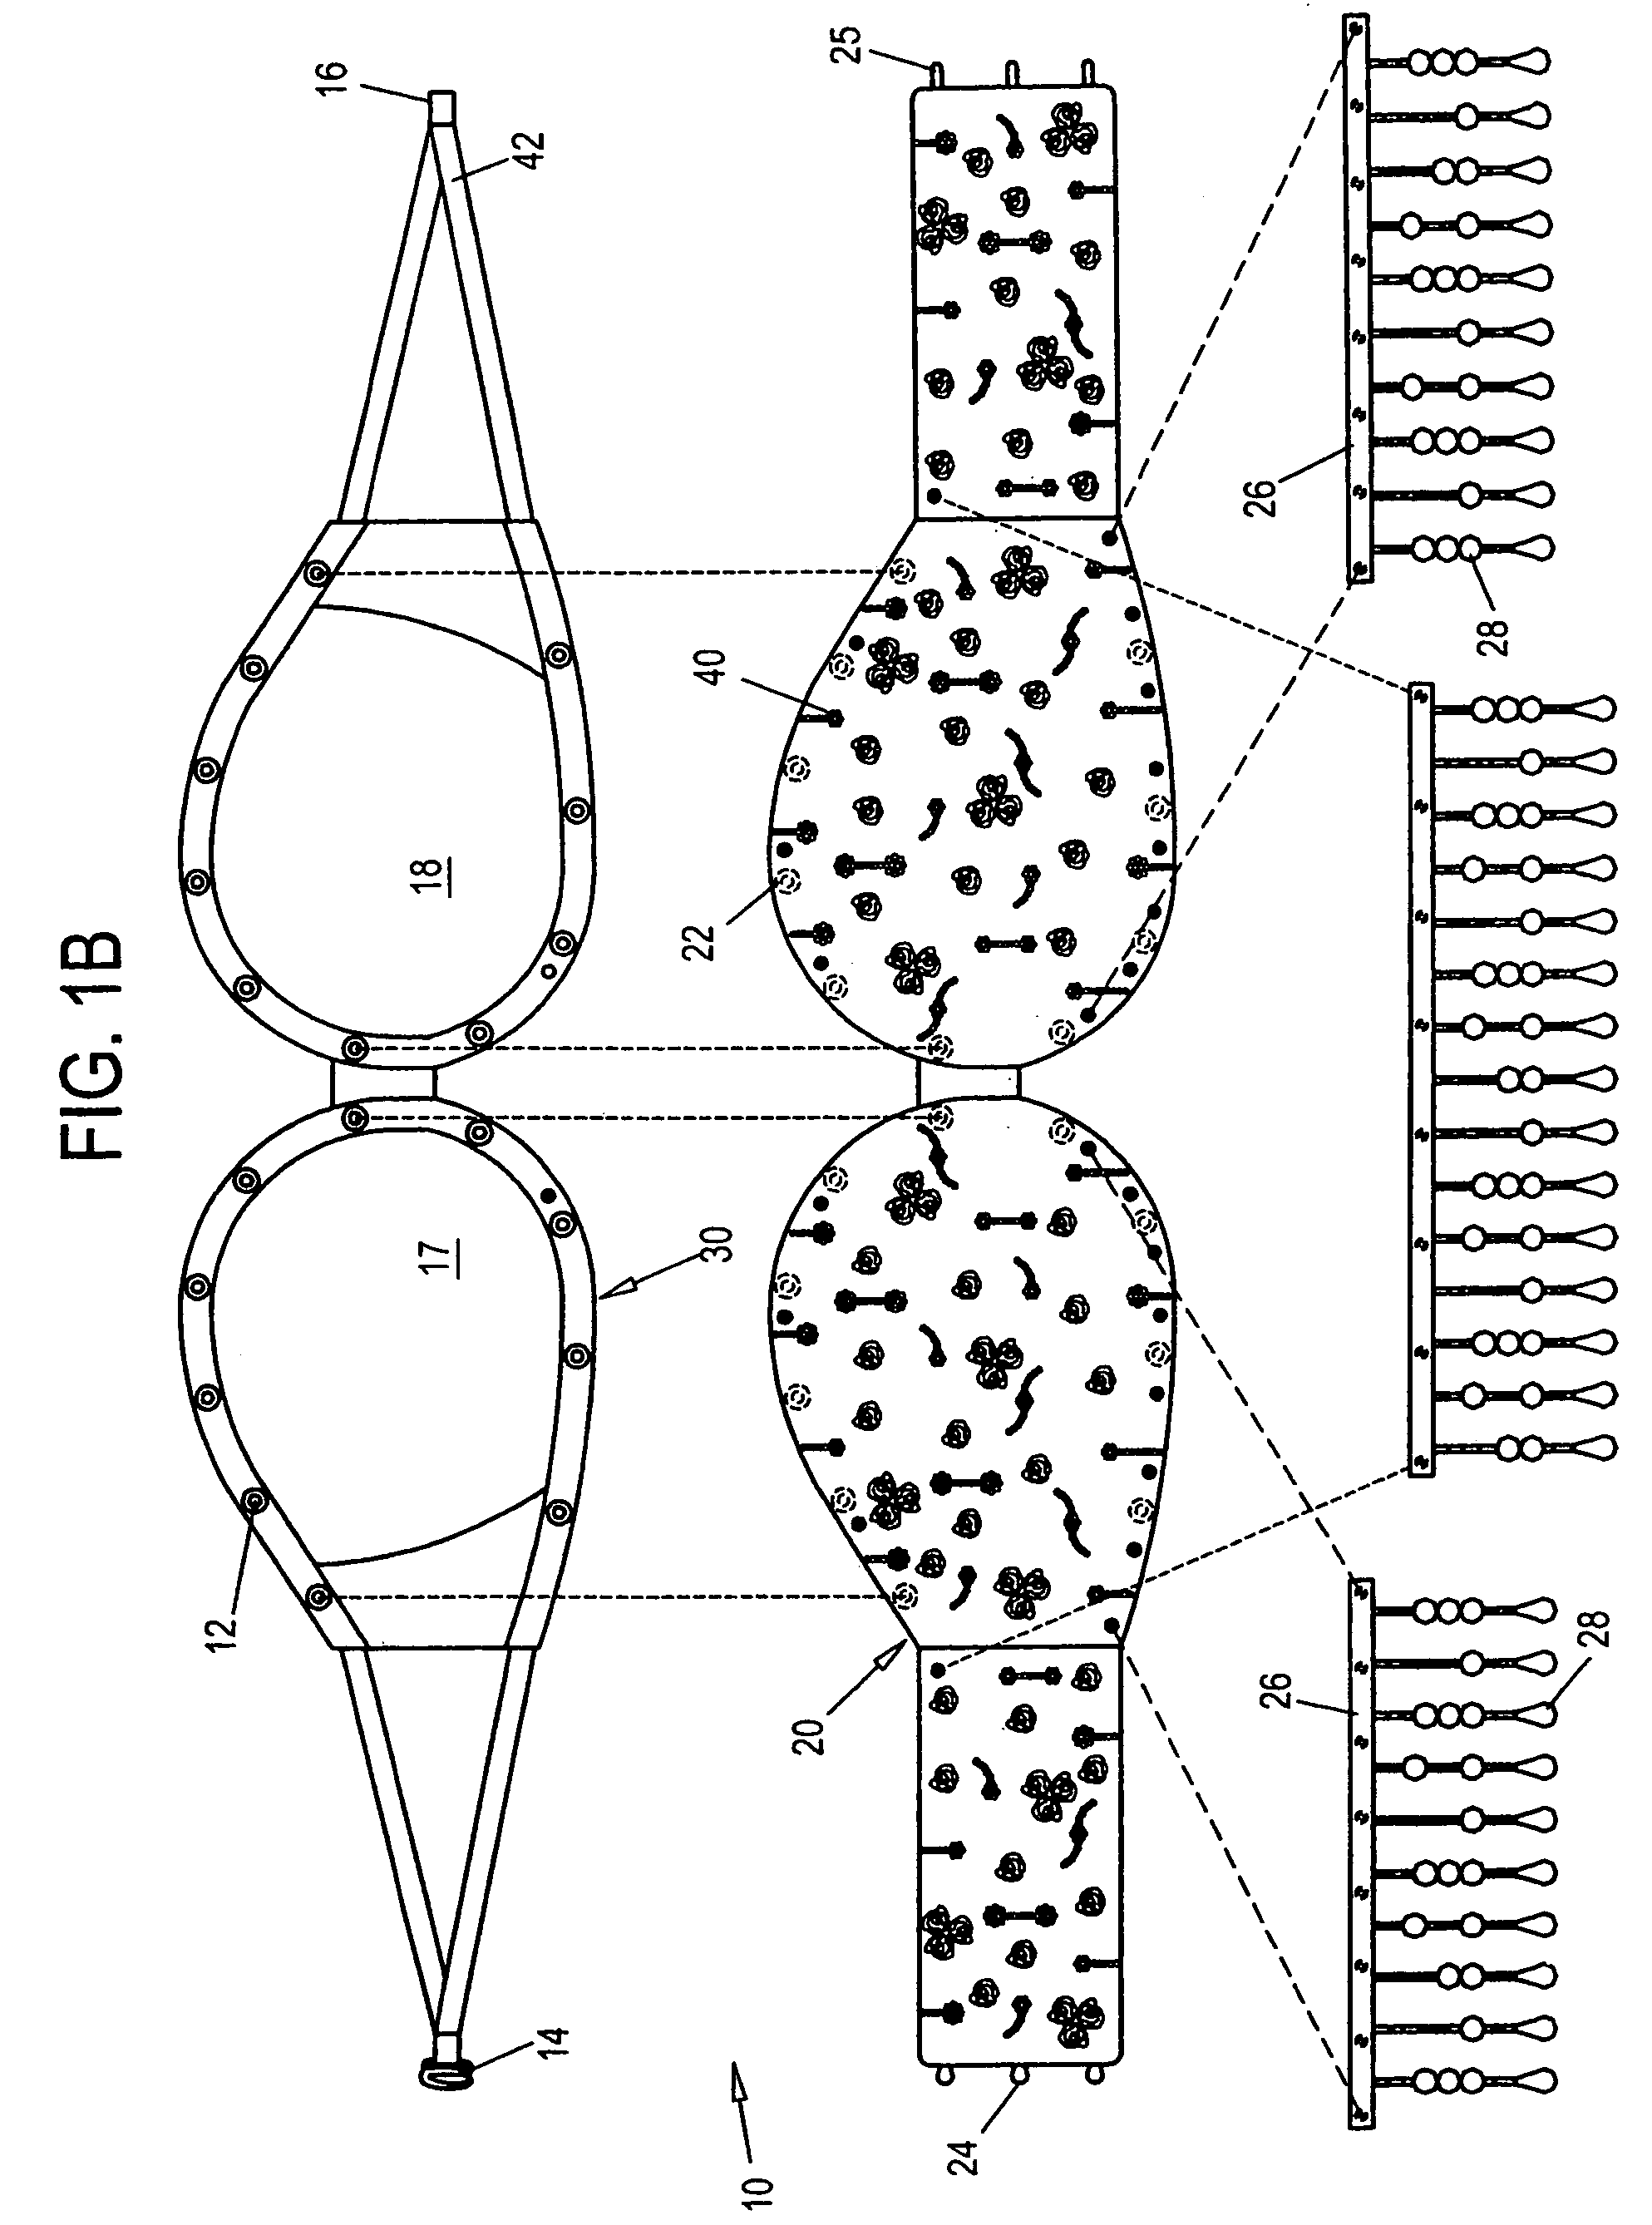 Washable costume system and method of manufacture